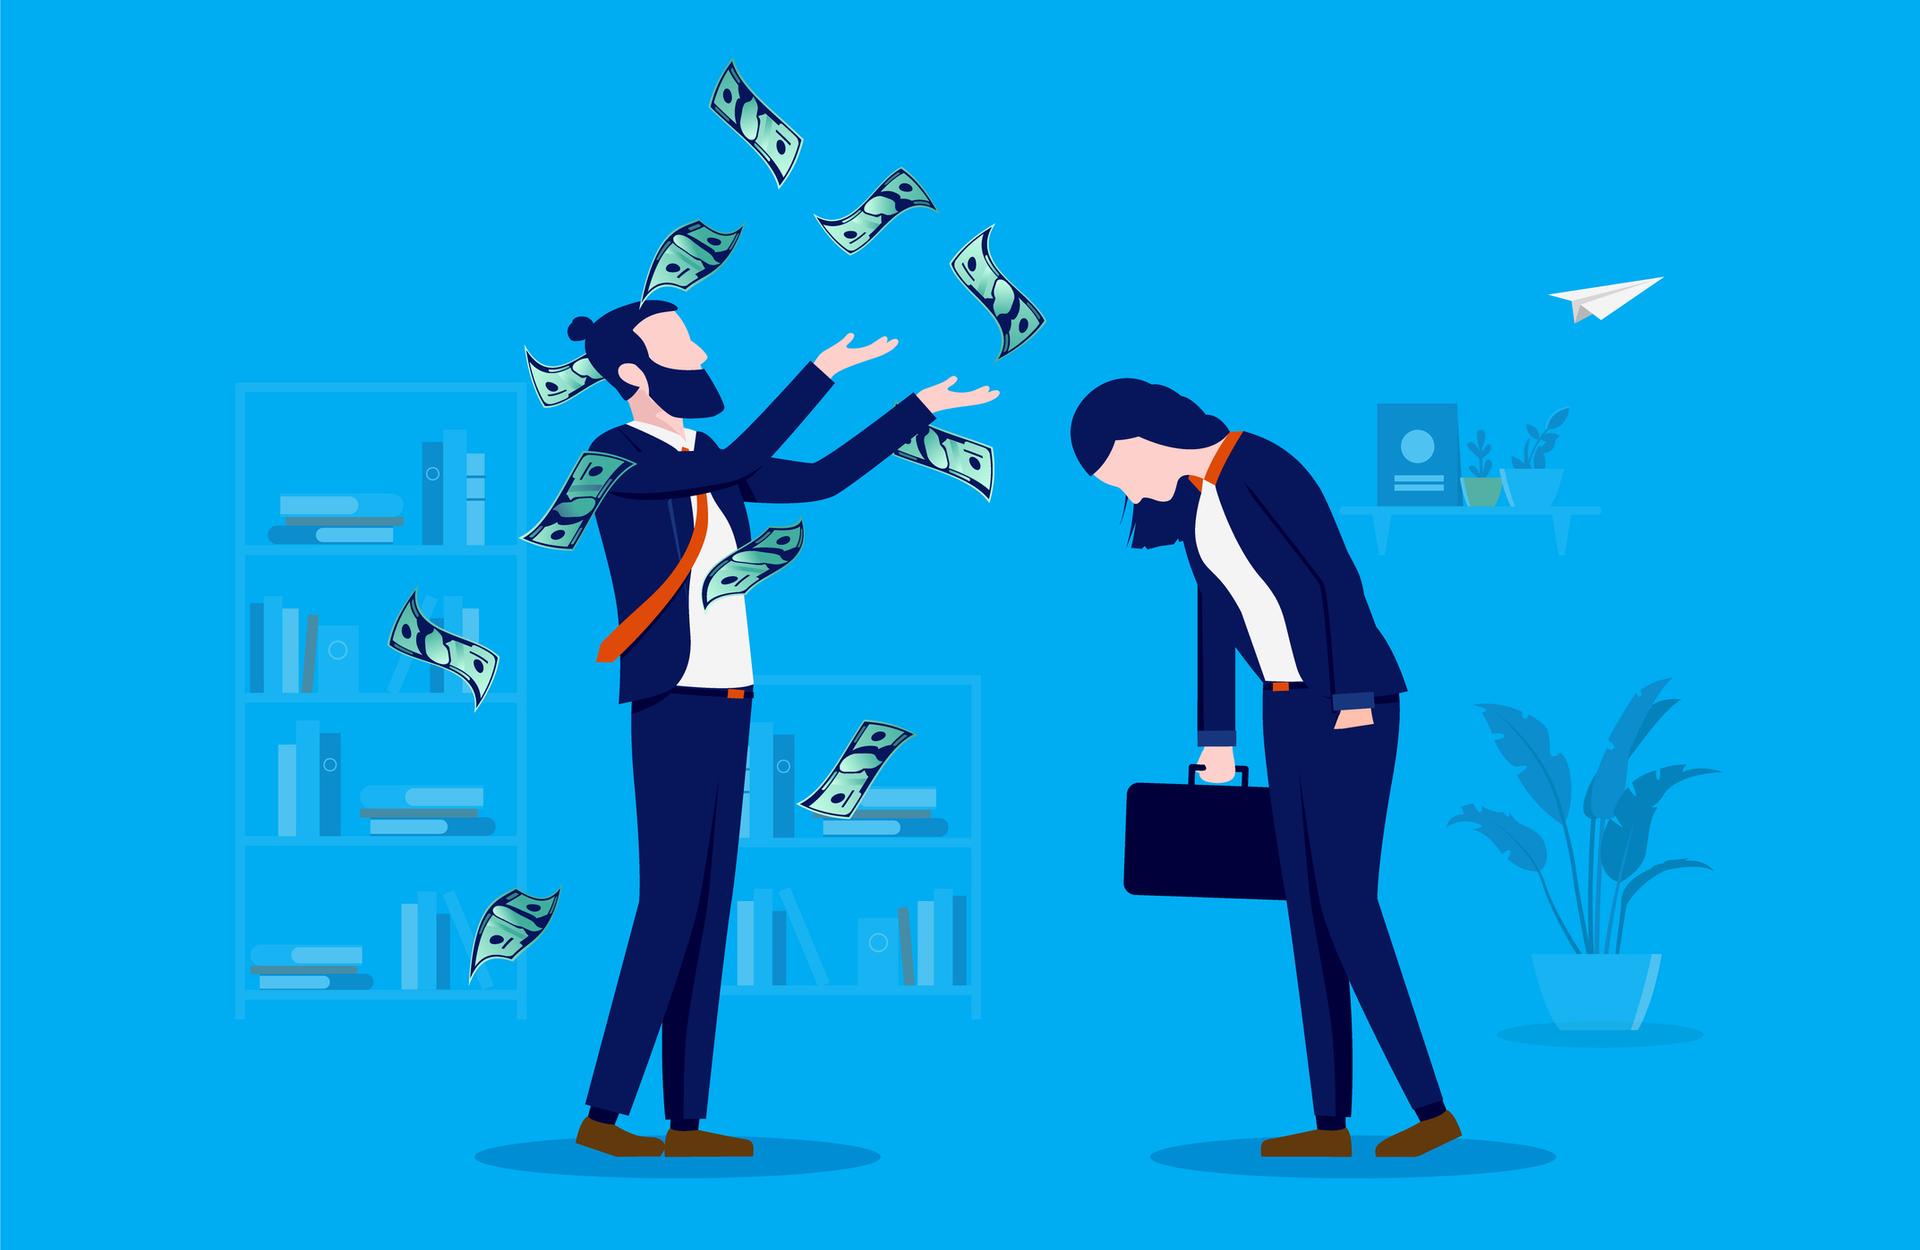 Businessman standing in work place throwing money in air in front of woman. Gender inequality concept. Vector illustration.